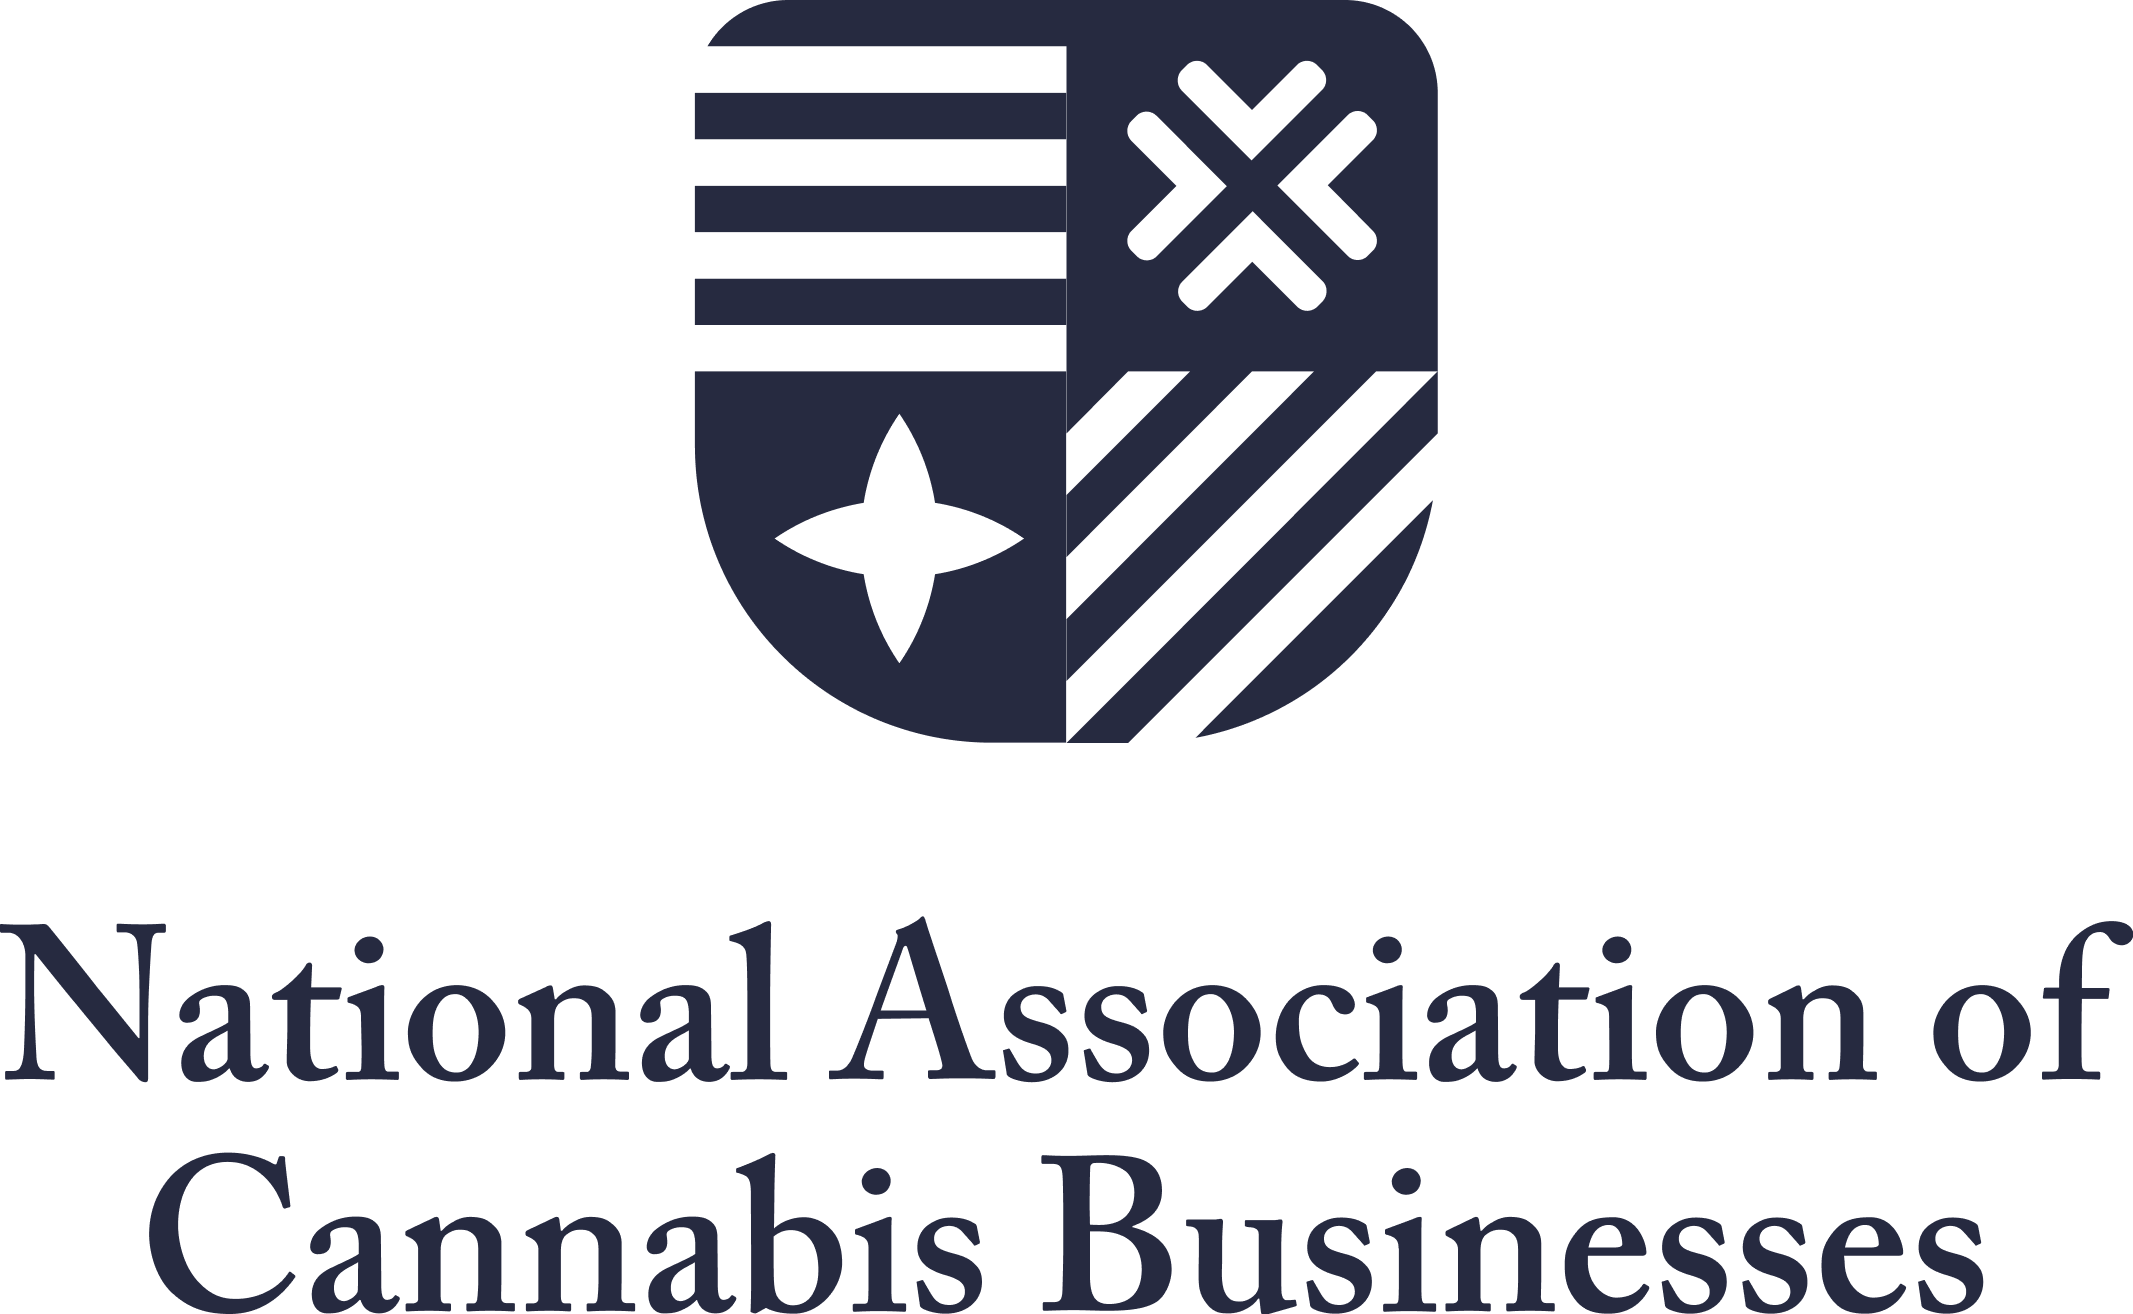 Logo of the National Association of Cannabis Businesses featuring a stylized blue and white emblem next to the organization's name in navy blue font.